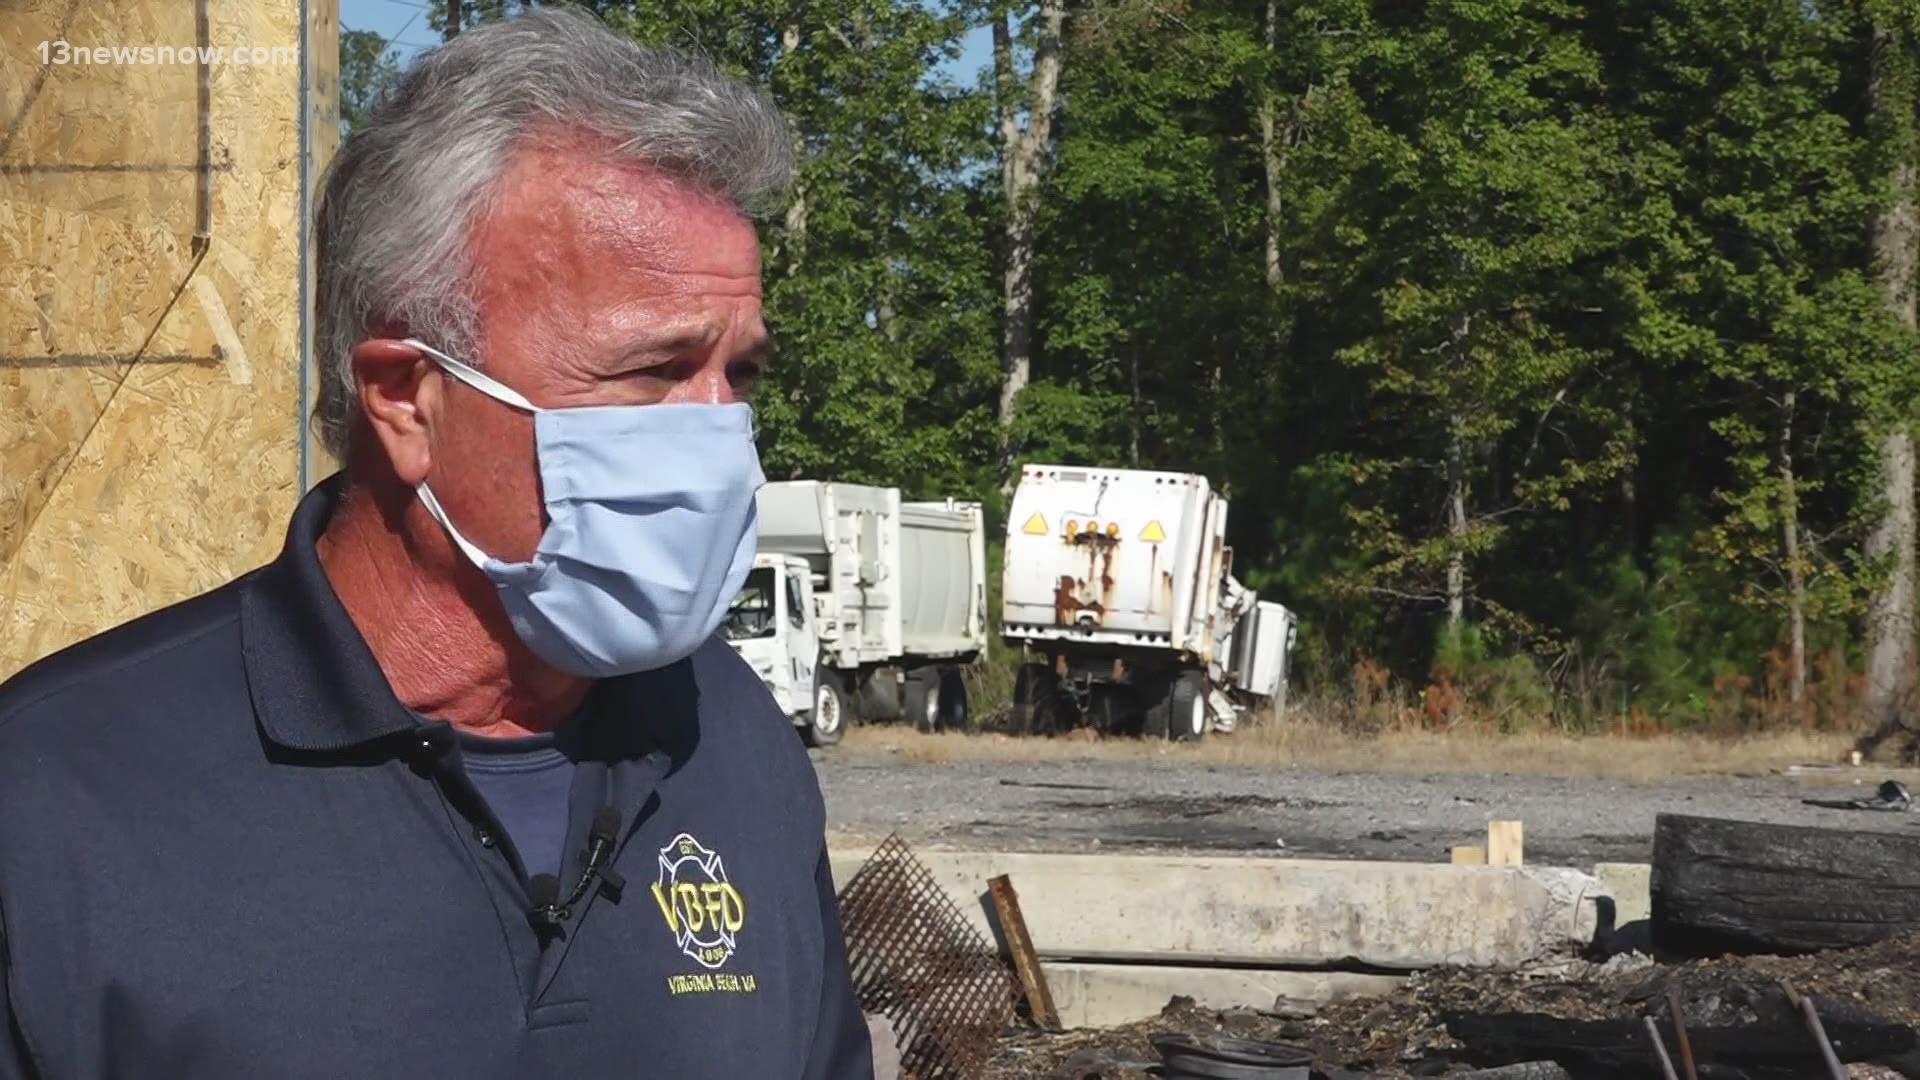 Art Kohn, the public information officer for the Virginia Beach Fire Department, was walking along Rudee Point Road when he was hit by a truck on Tuesday.